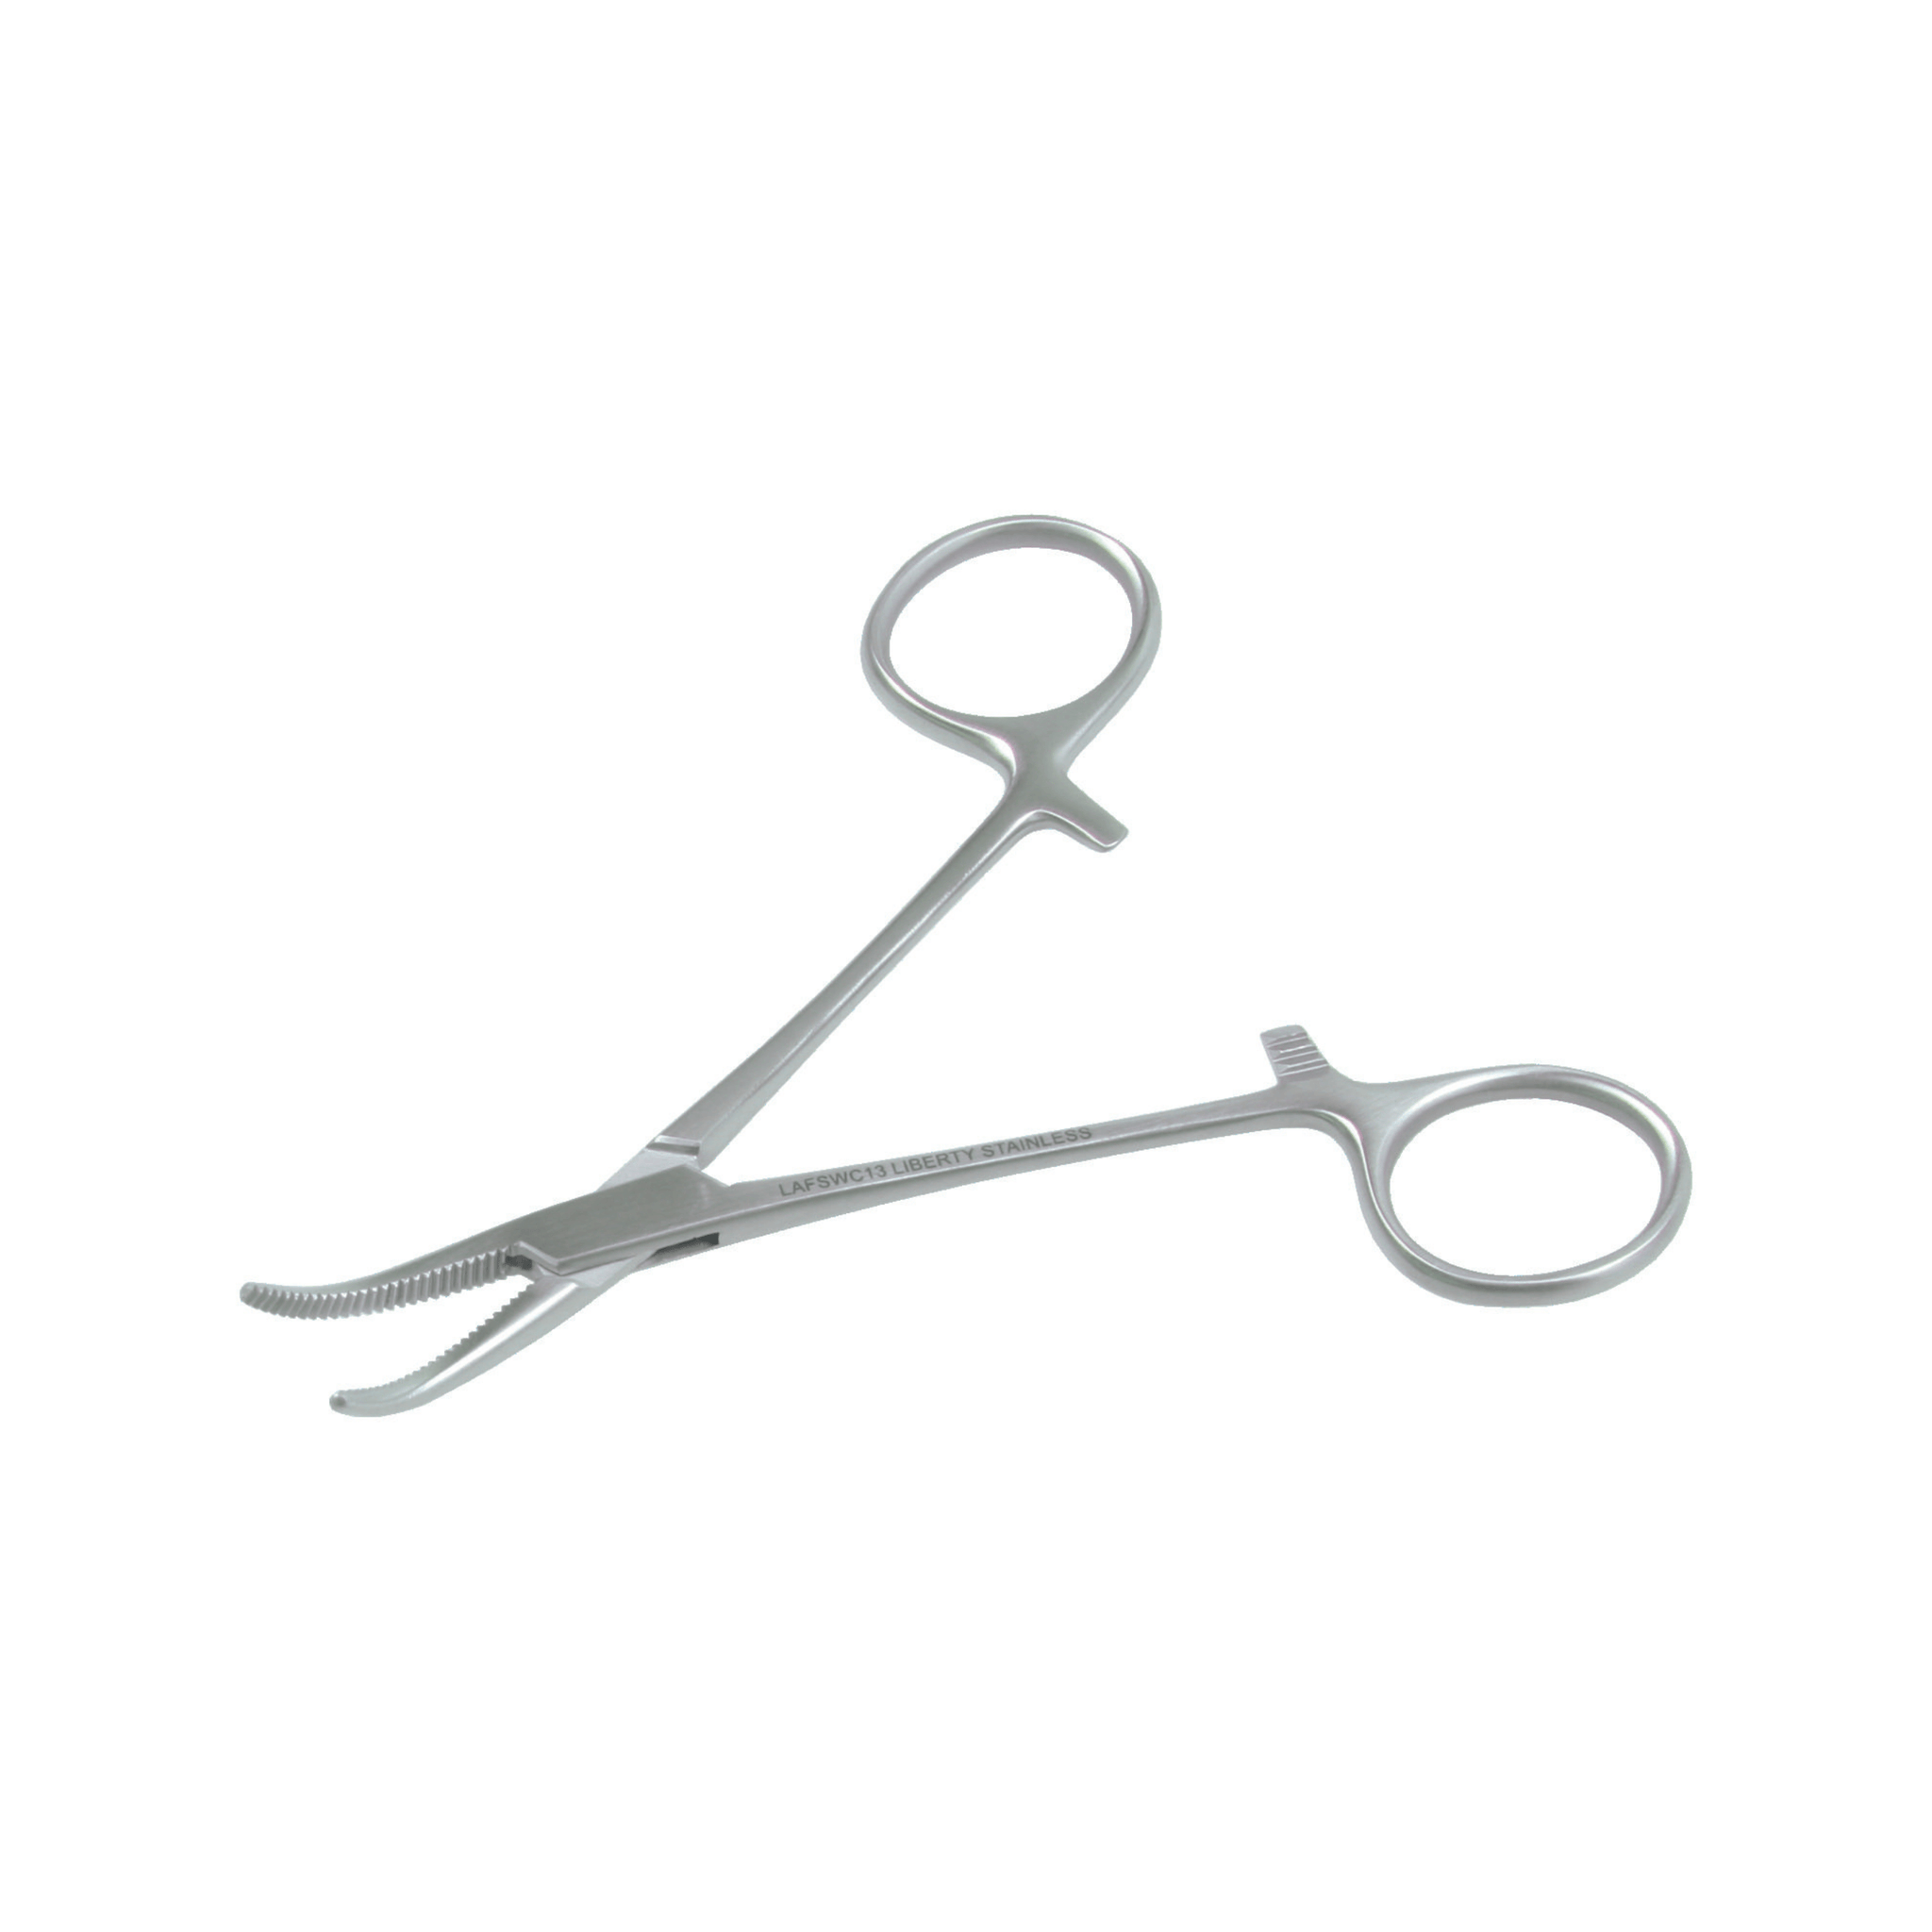 Spencer Wells Atery Forceps- Curved, 13 cm